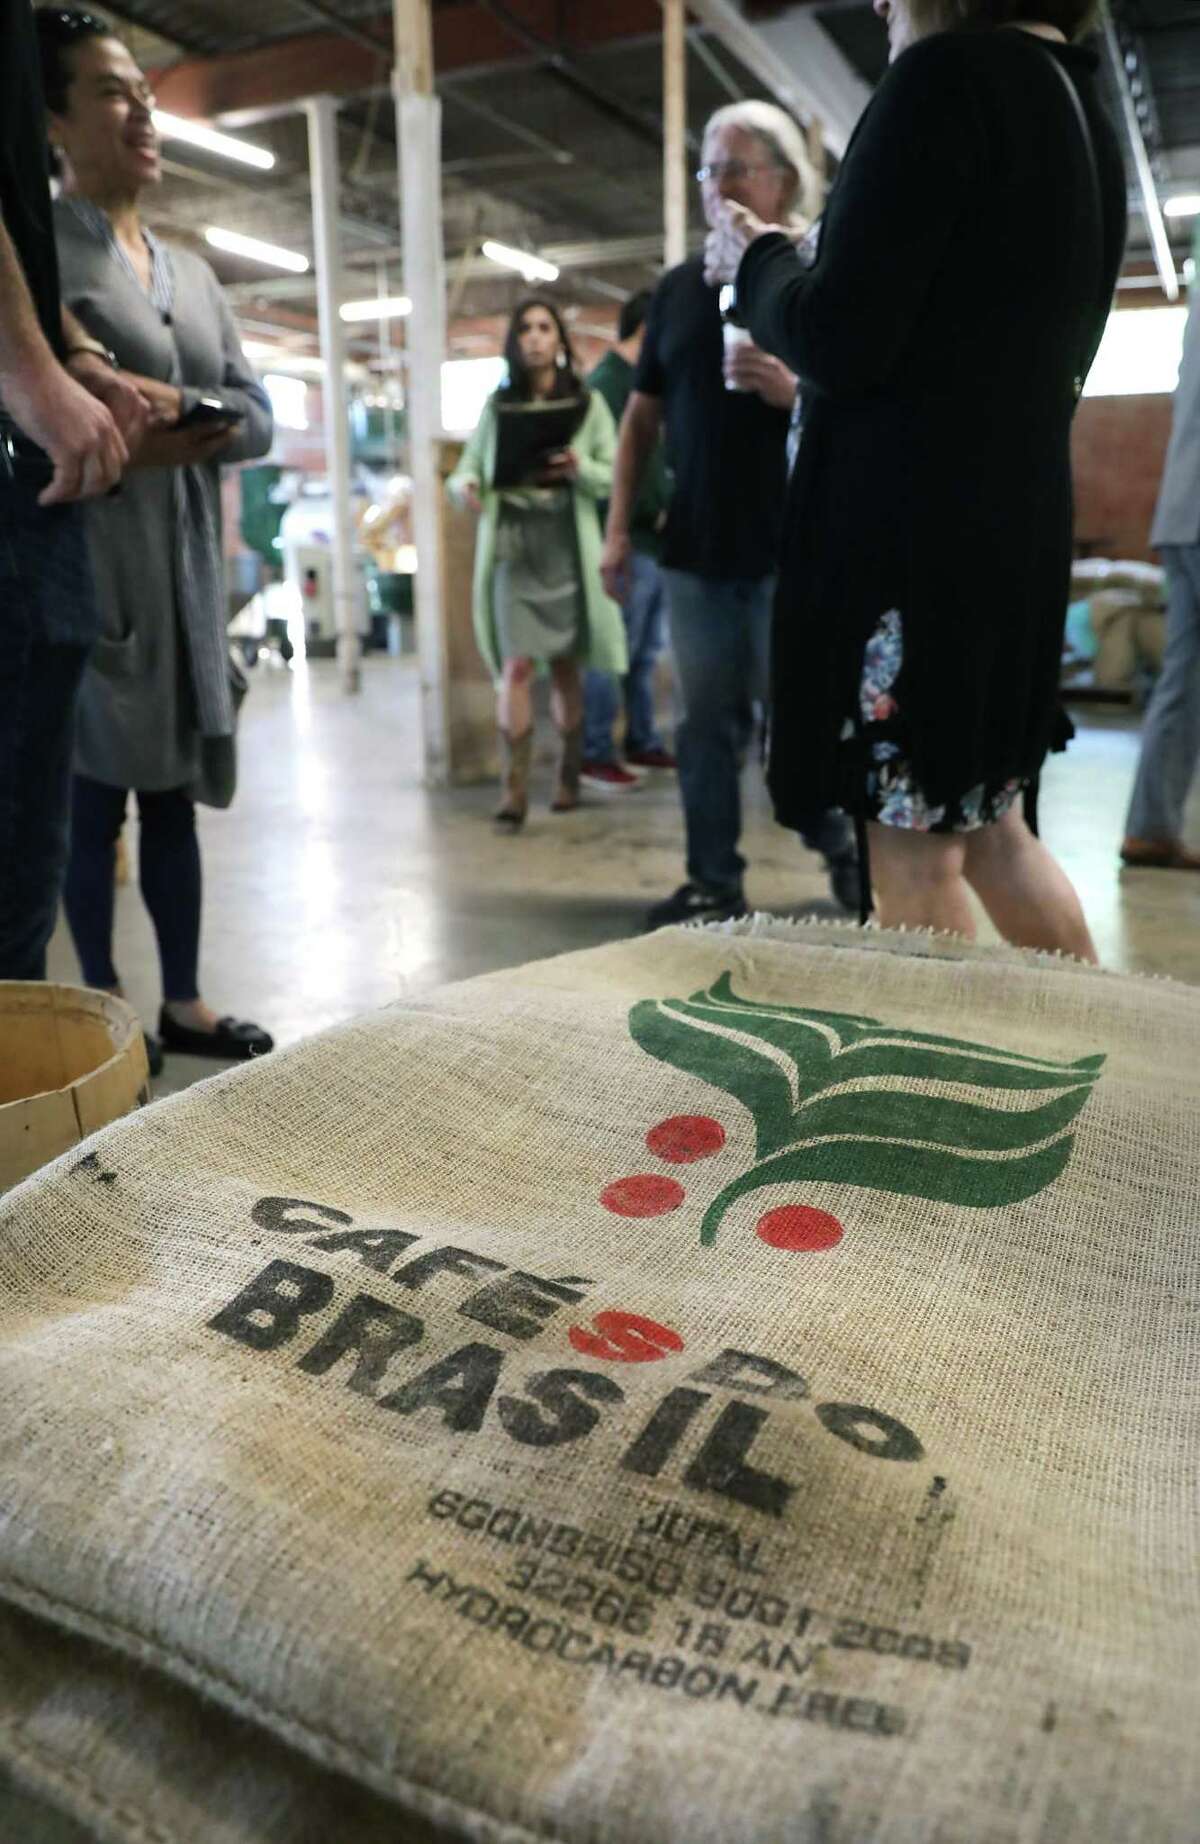 Small business owners gathered at What's Brewing Coffee Roasters on April 25, 2019. Coffee roasters are concerned about the effects of climate change on coffee crops around the world.